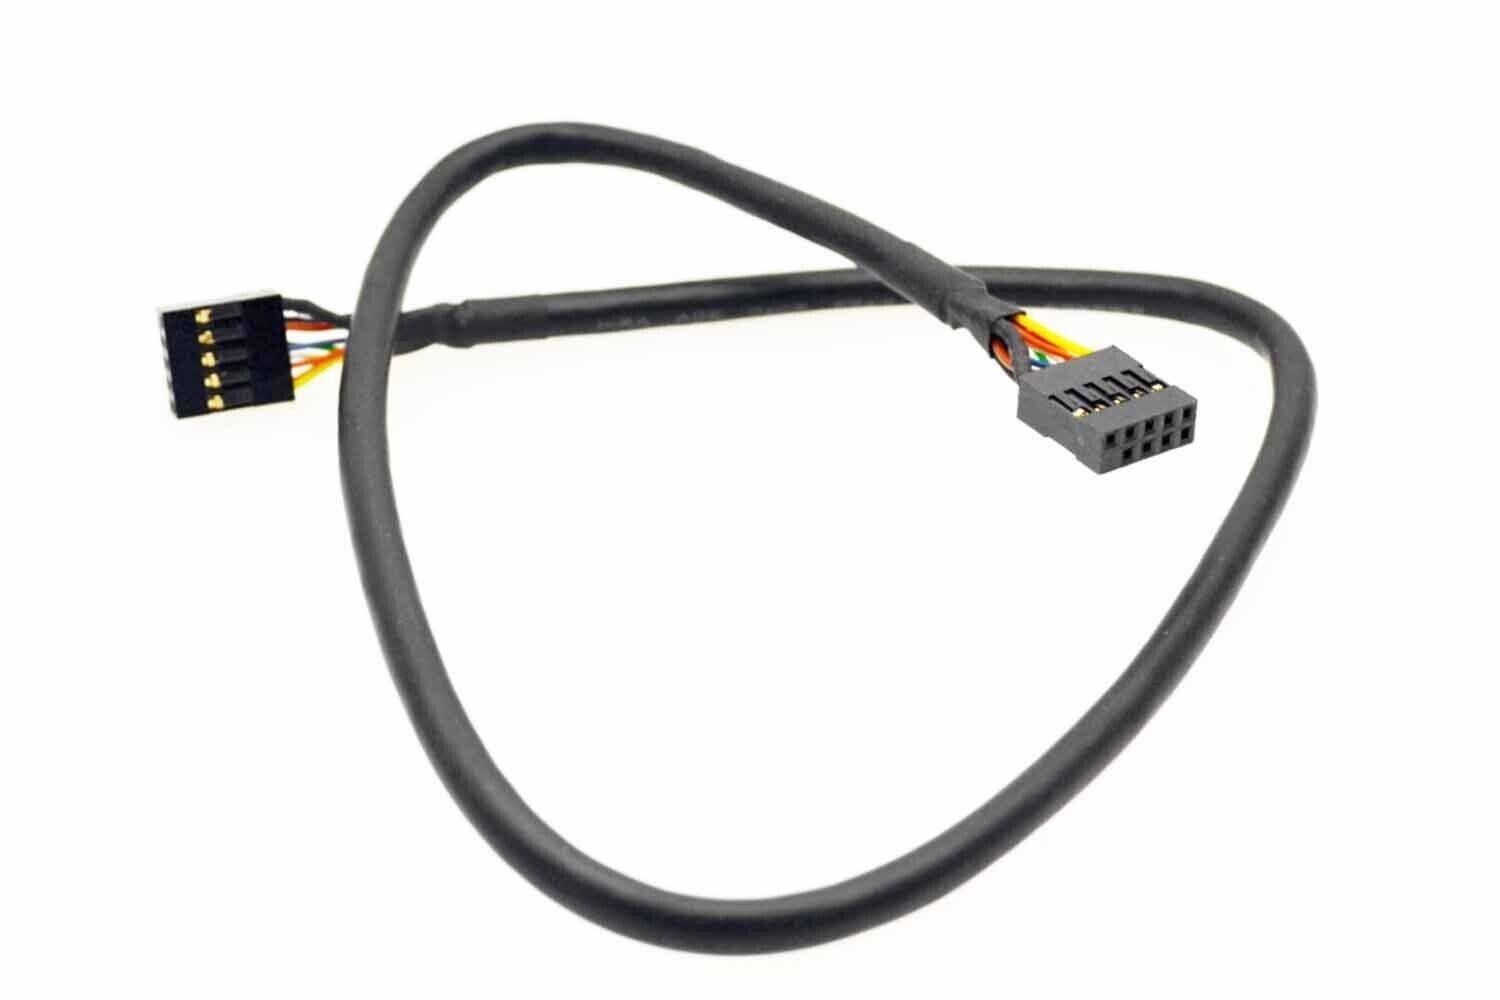 USB 2.0 Internal Motherboard Header Cable USB 9pin Female to Female